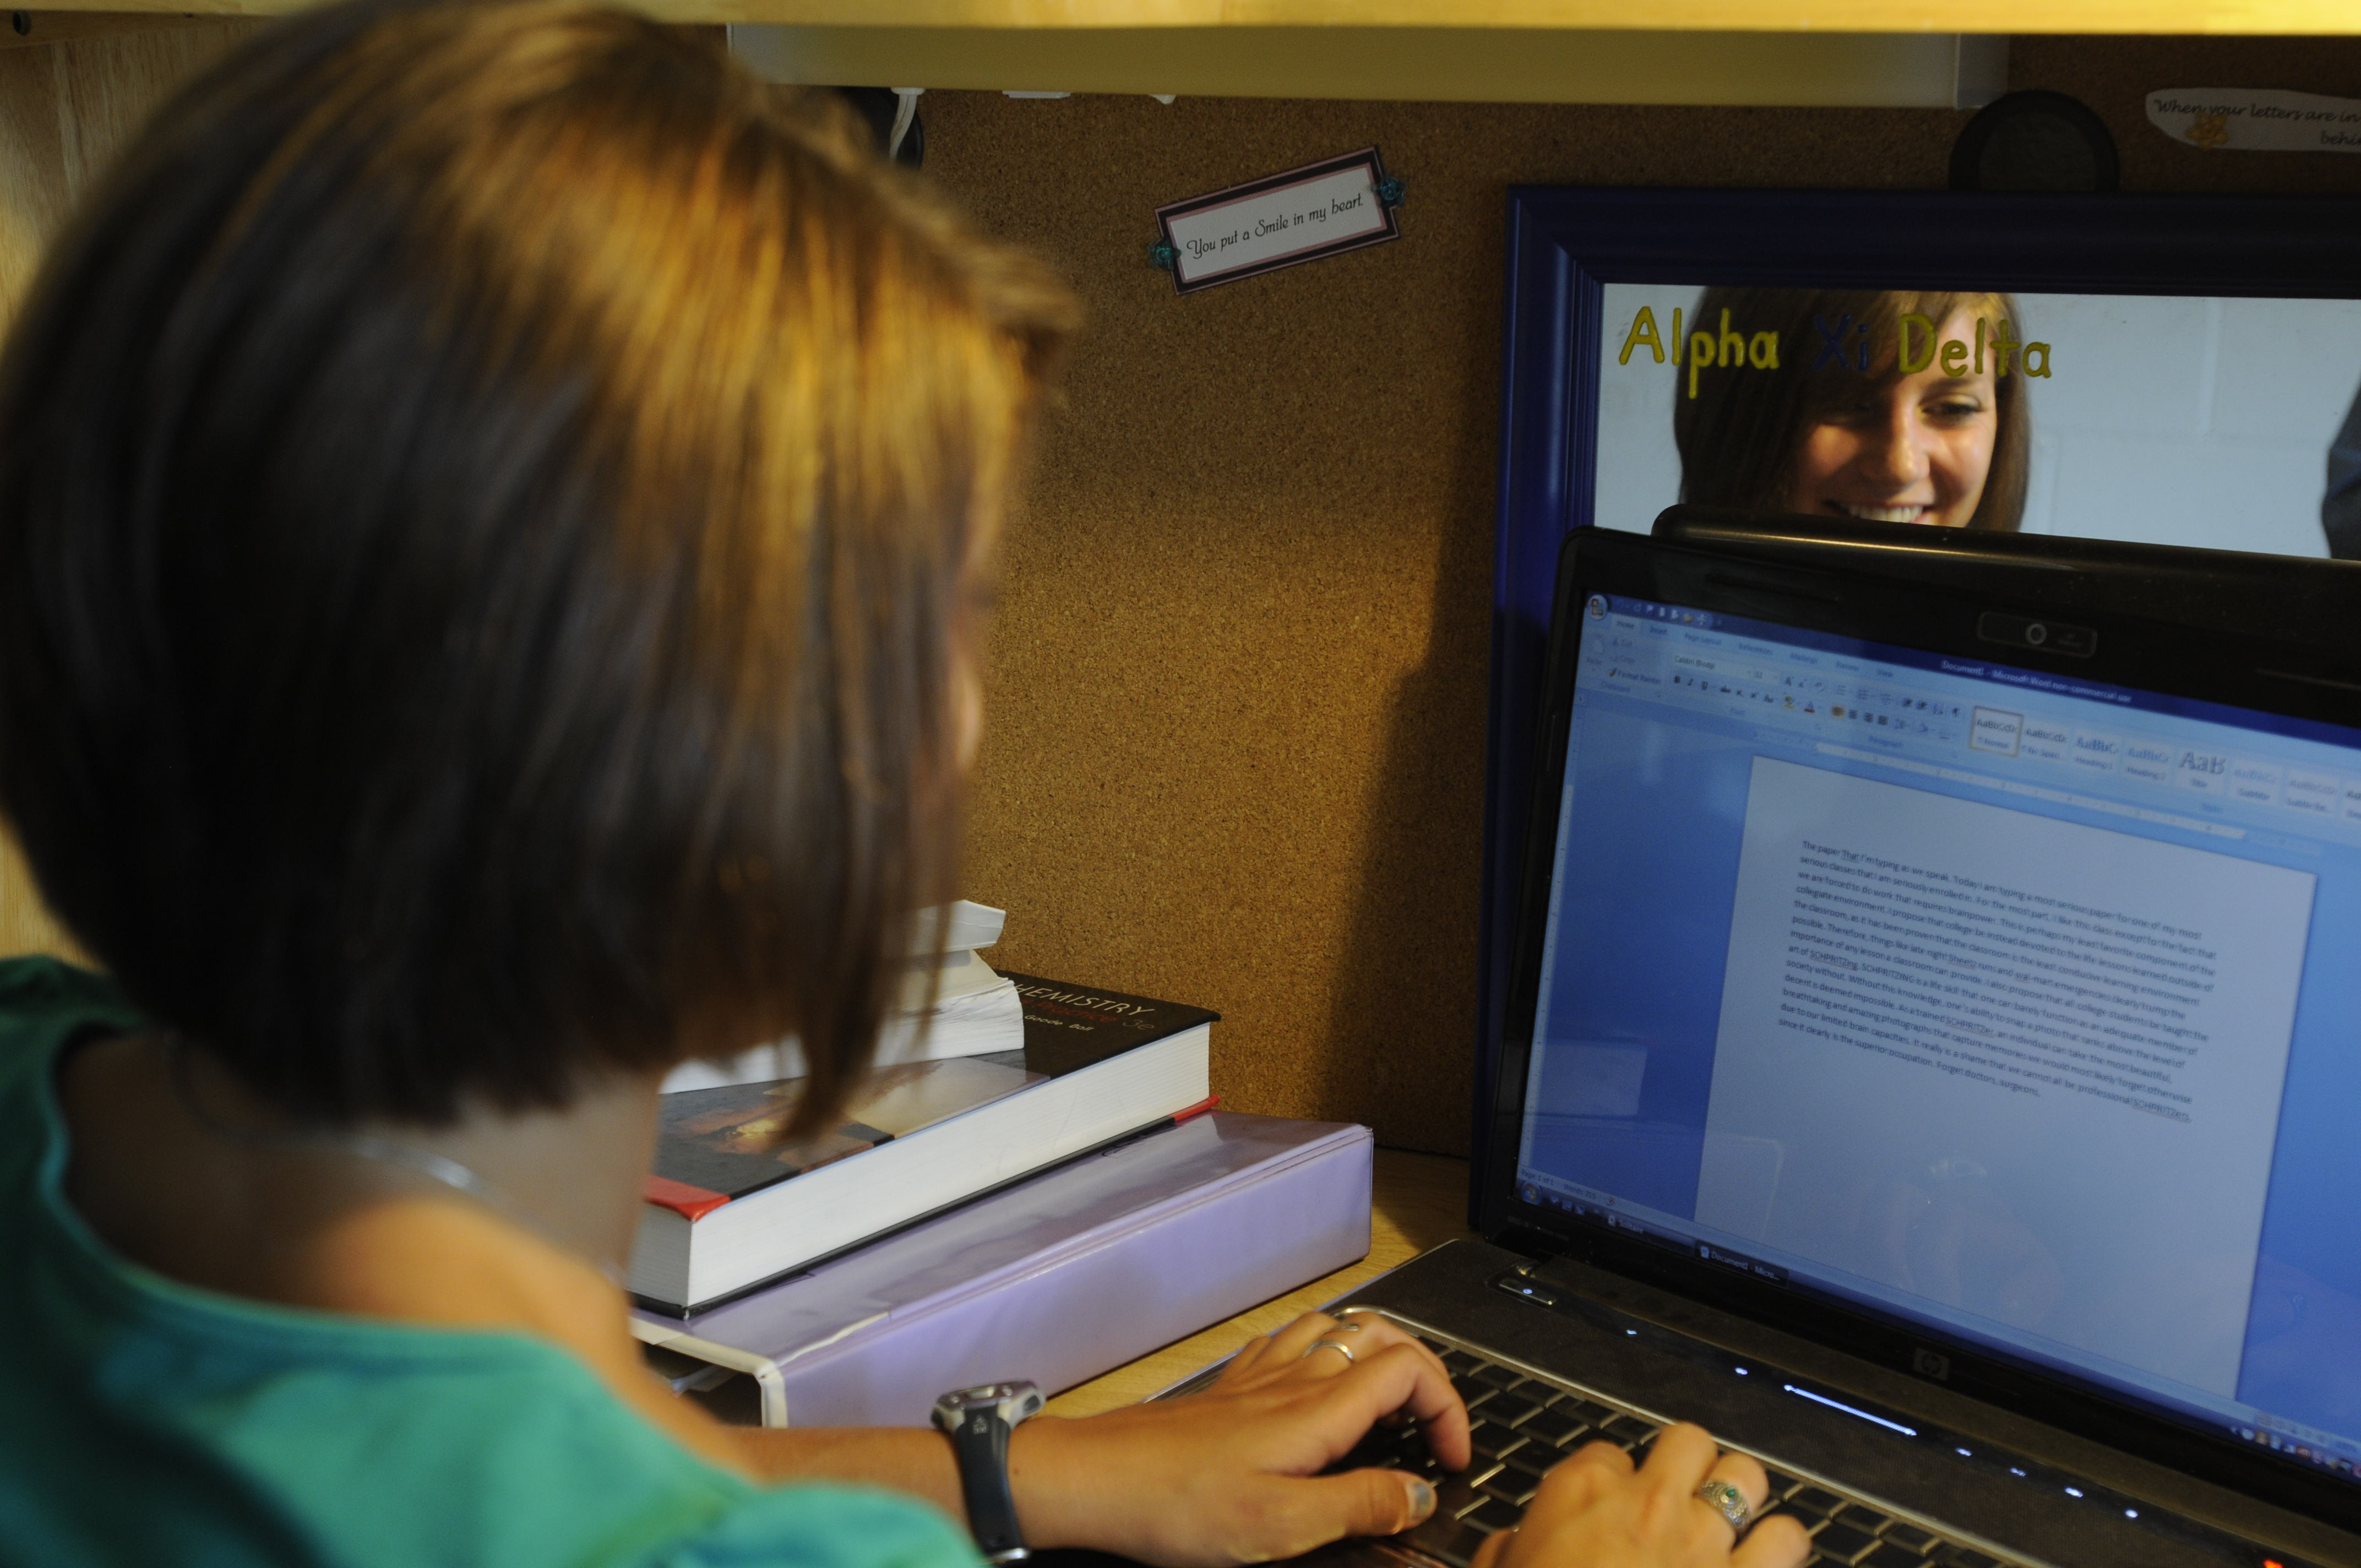 Student on laptop in residence hall room